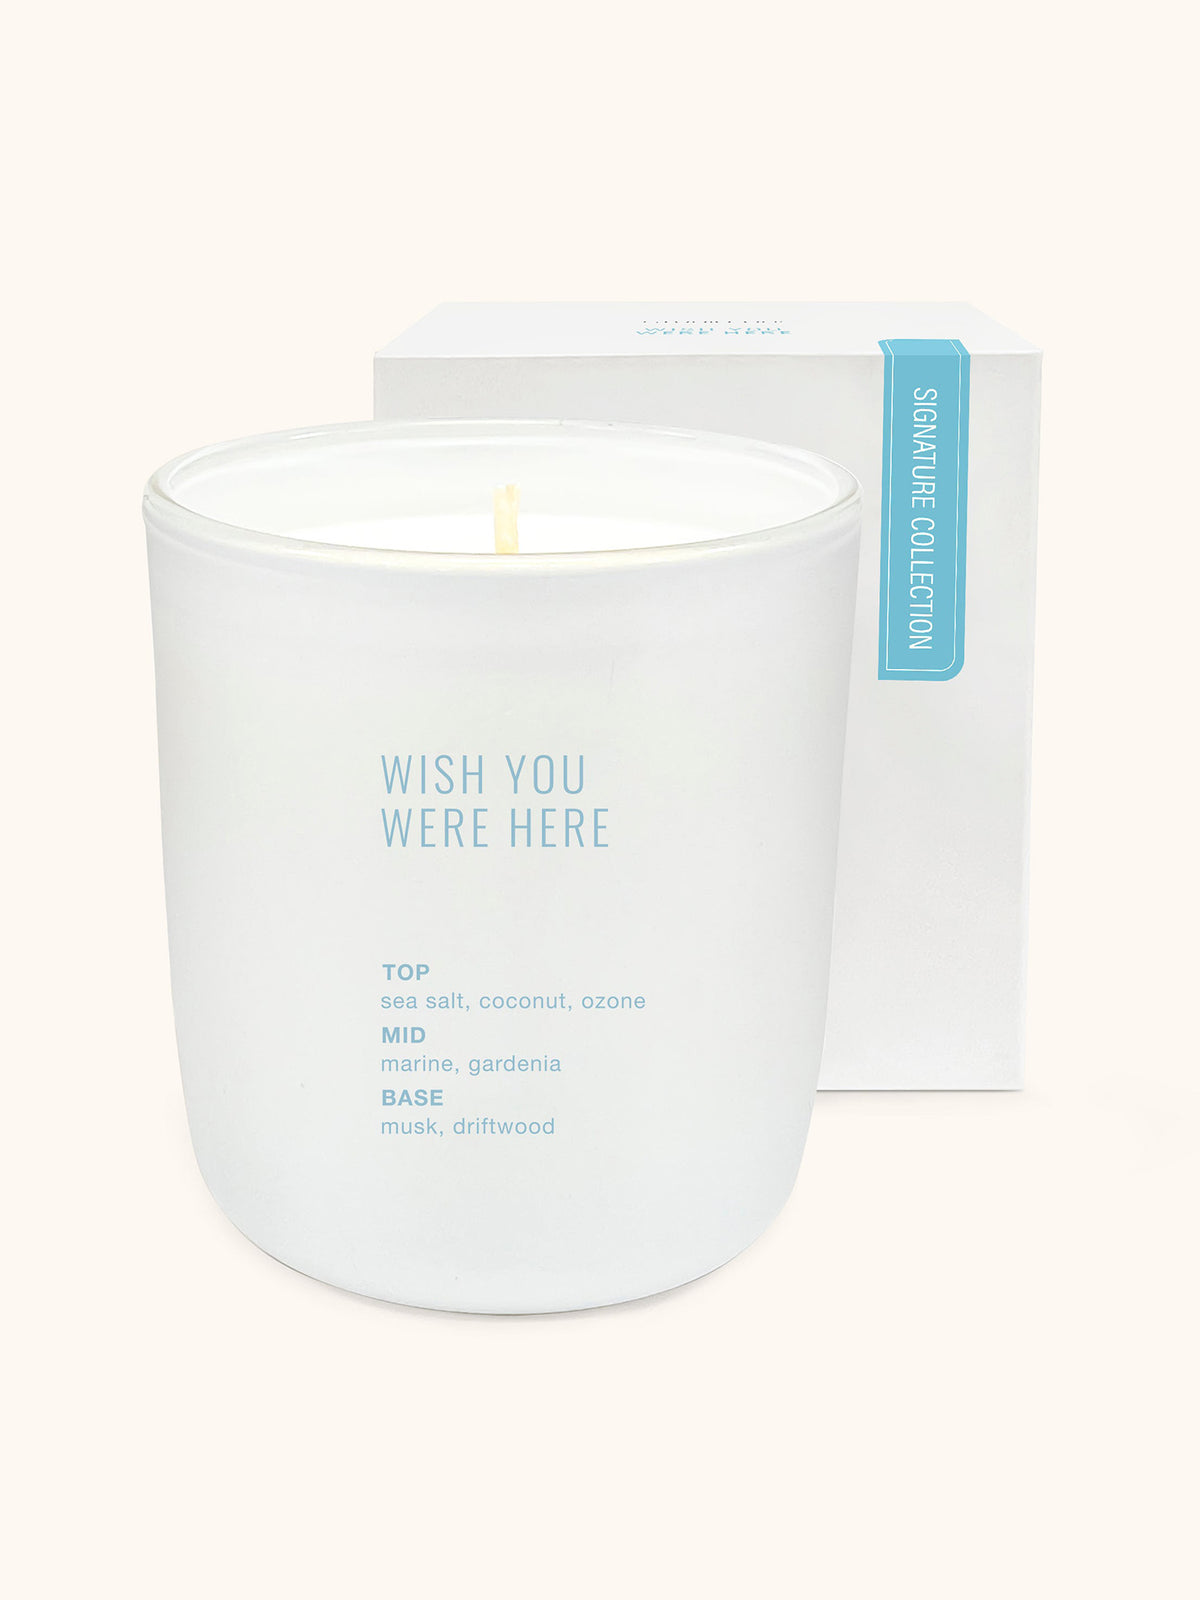 Wish You Were Here Signature Candle